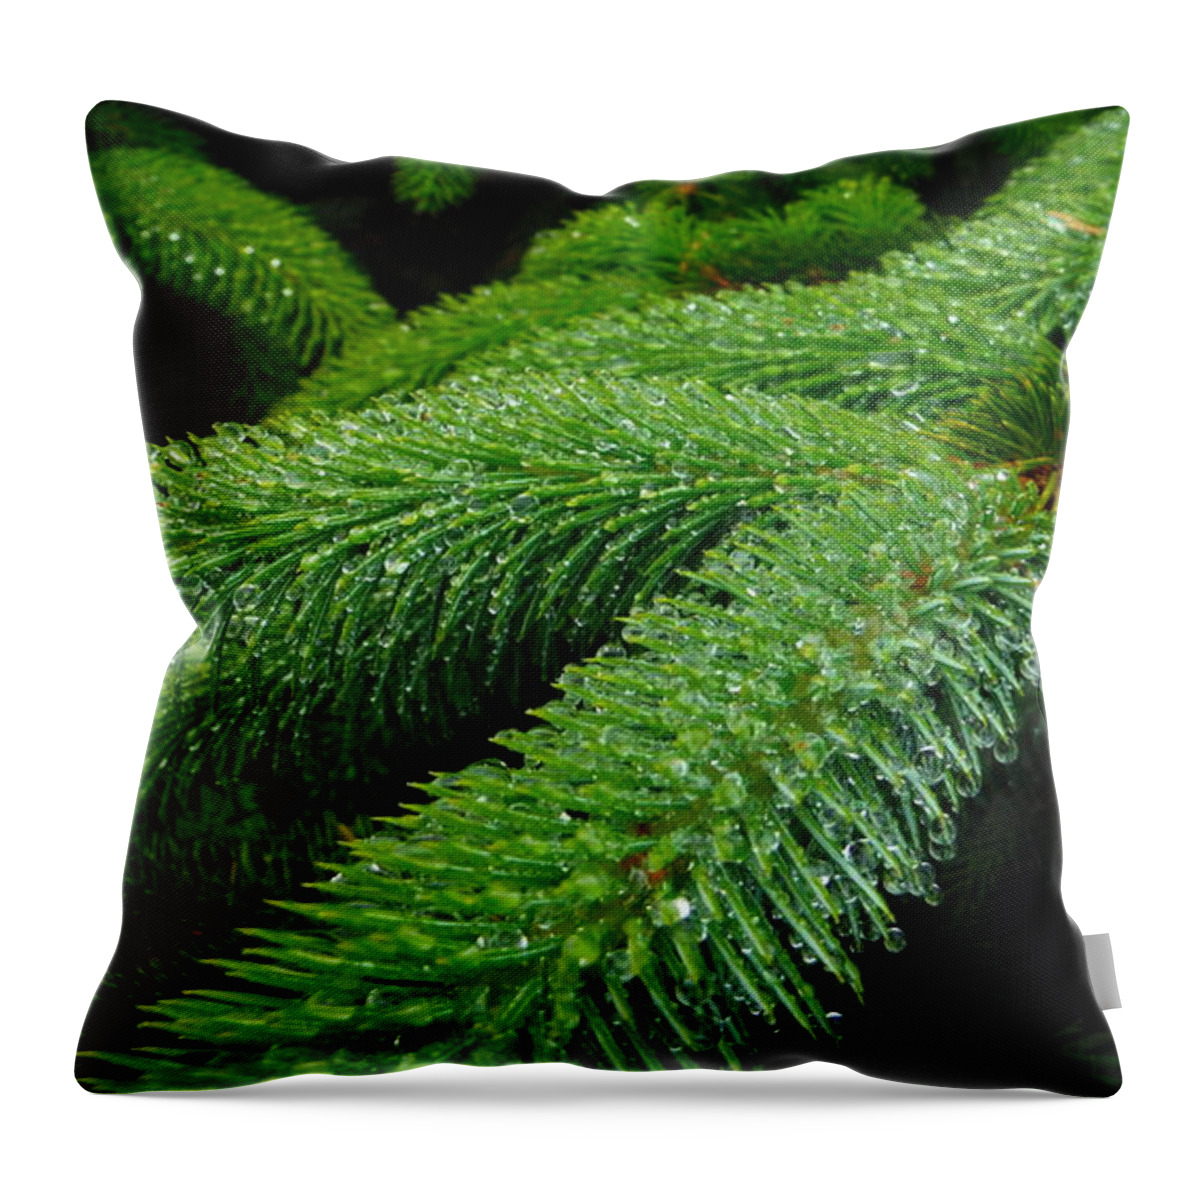 Dripping Oregon Coastal Pines Throw Pillow featuring the photograph Dripping Oregon Coastal Pines by Paddy Shaffer